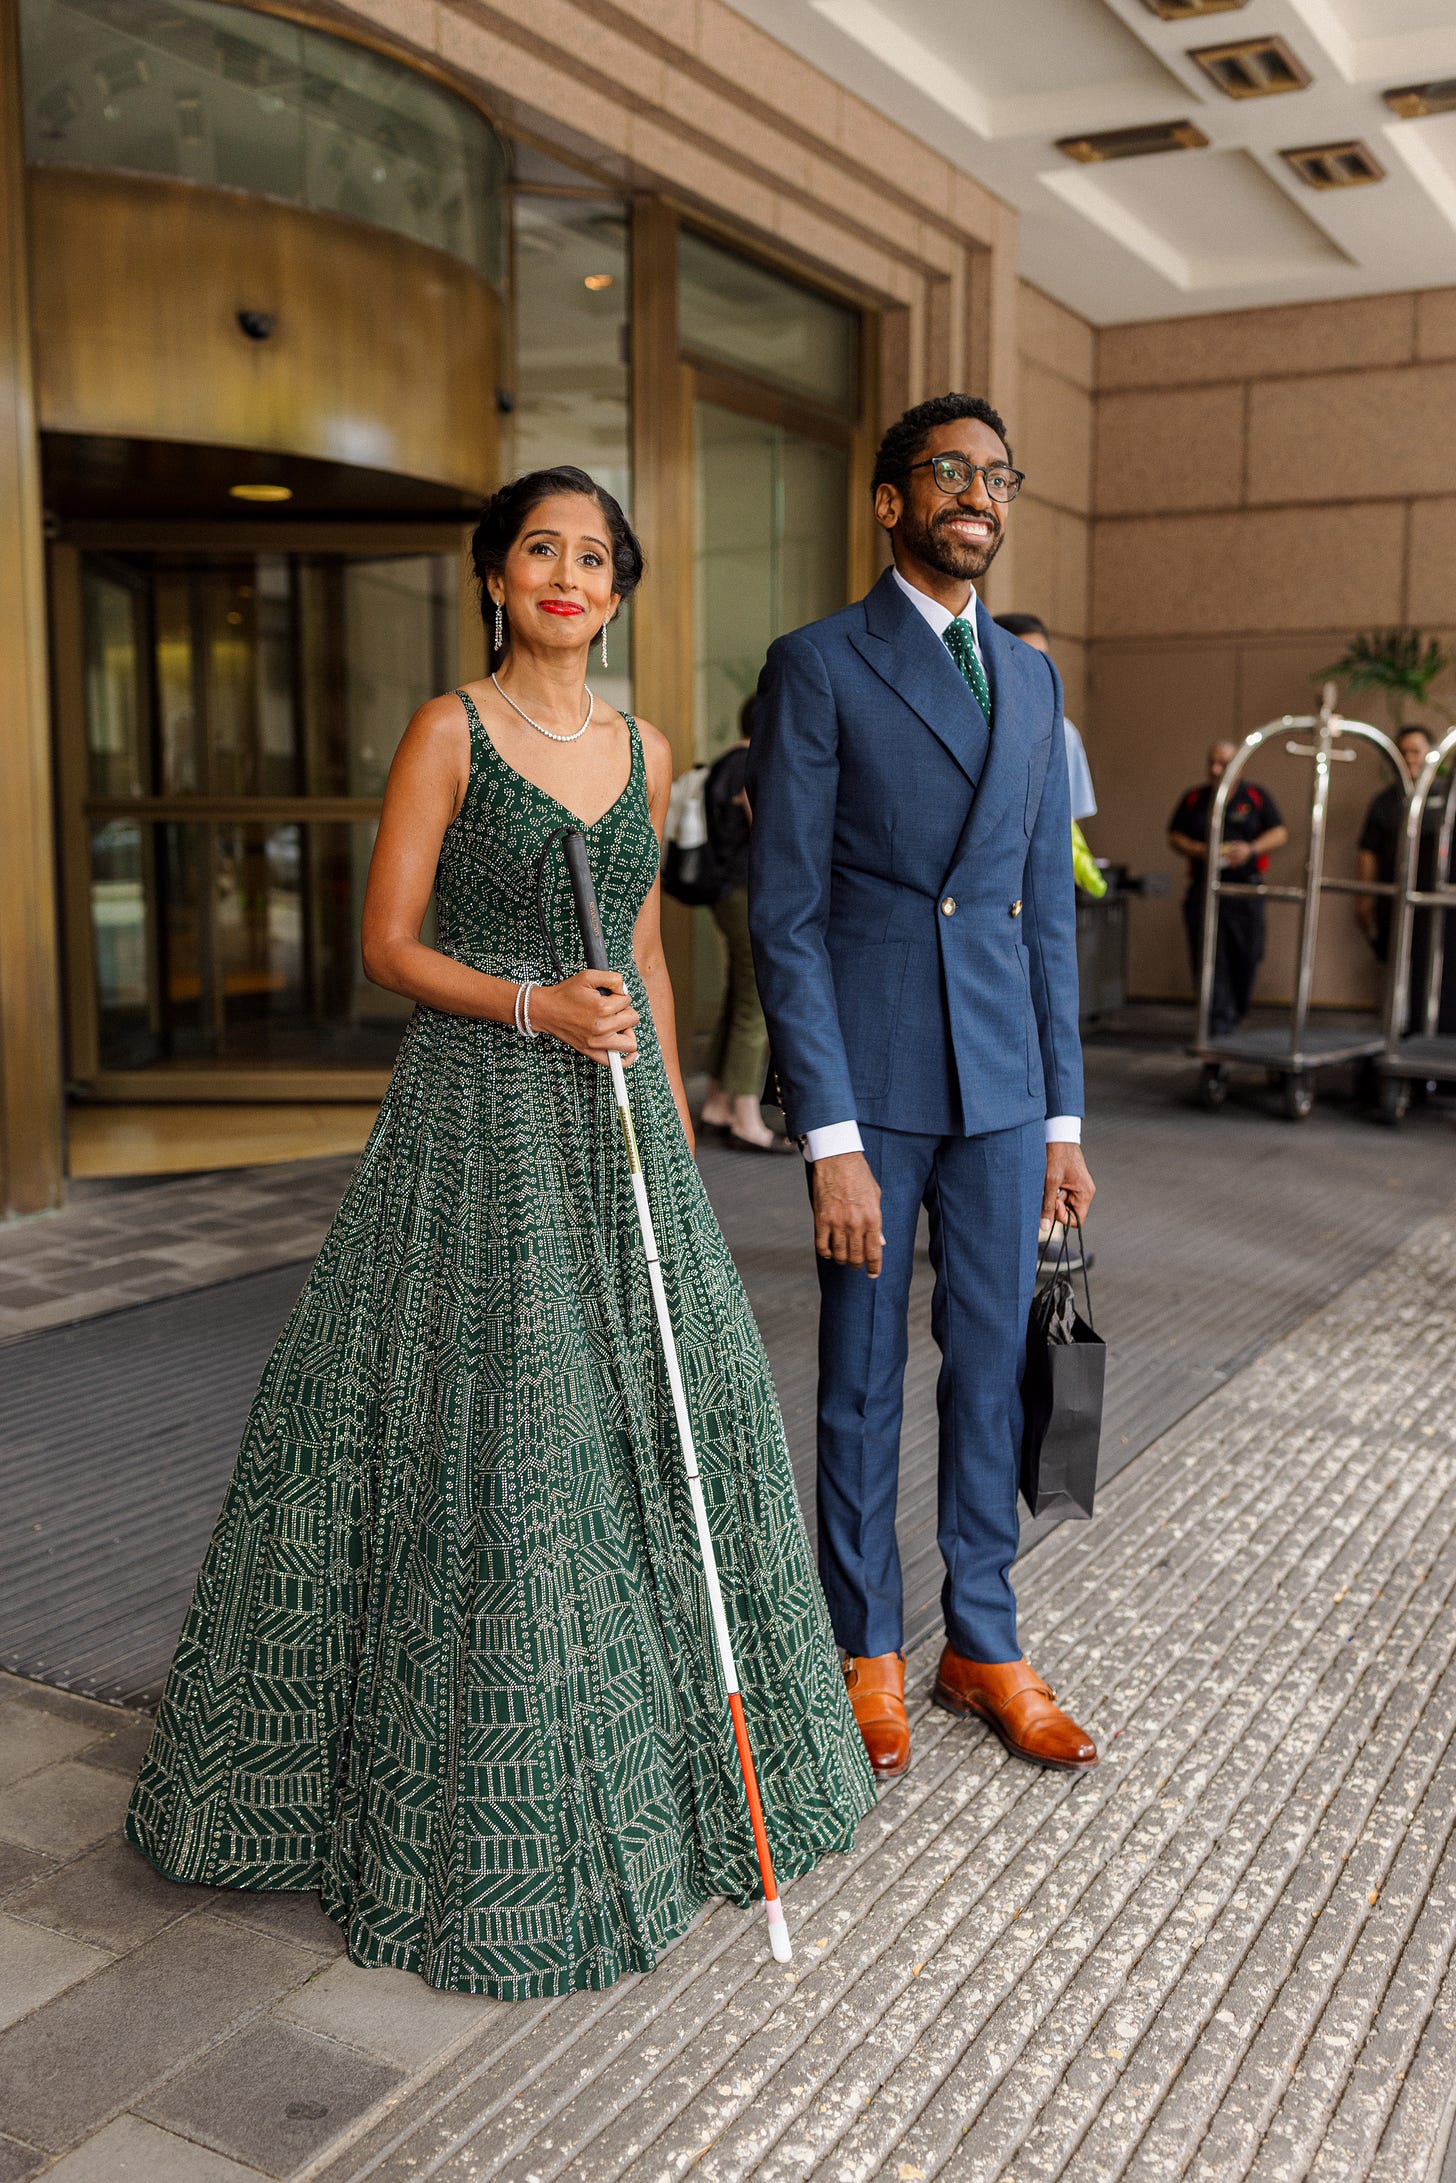 The couple stands in front of the Fairmont, about to leave for the ceremony. Qudsiya, wearing a stunning, bottle green floor length gown covered in beads, holds her white cane in front of her. Her smile, with lips closed, is full of anticipation but measured. Sean, in a navy blue double breasted suit, holds a small black gift bag in his left hand and looks off, smiling, toward where family members are arriving. Little pops of color stand out: Qudsiya, with her gleaming diamond jewelry and the white of her cane, her bold red lipstick and the red stripe near the tip of her cane; Sean with his white shirt collar and cuffs.